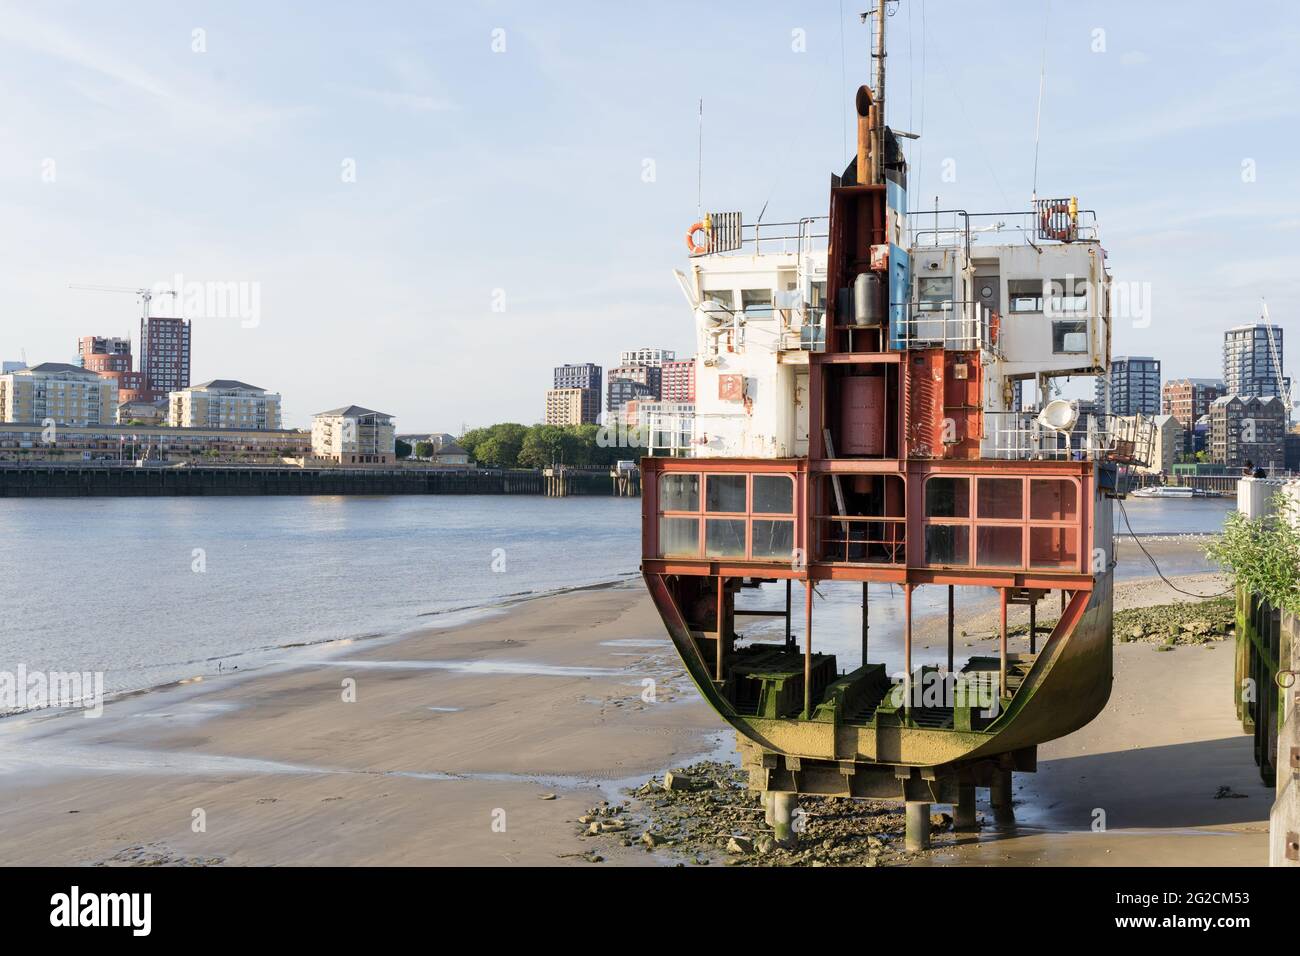 A 'Slice of Reality' ,9-metre segment of vertical section from 60 metre sand dredger , expose to element in river Thames, London Greenwich O2, UK Stock Photo